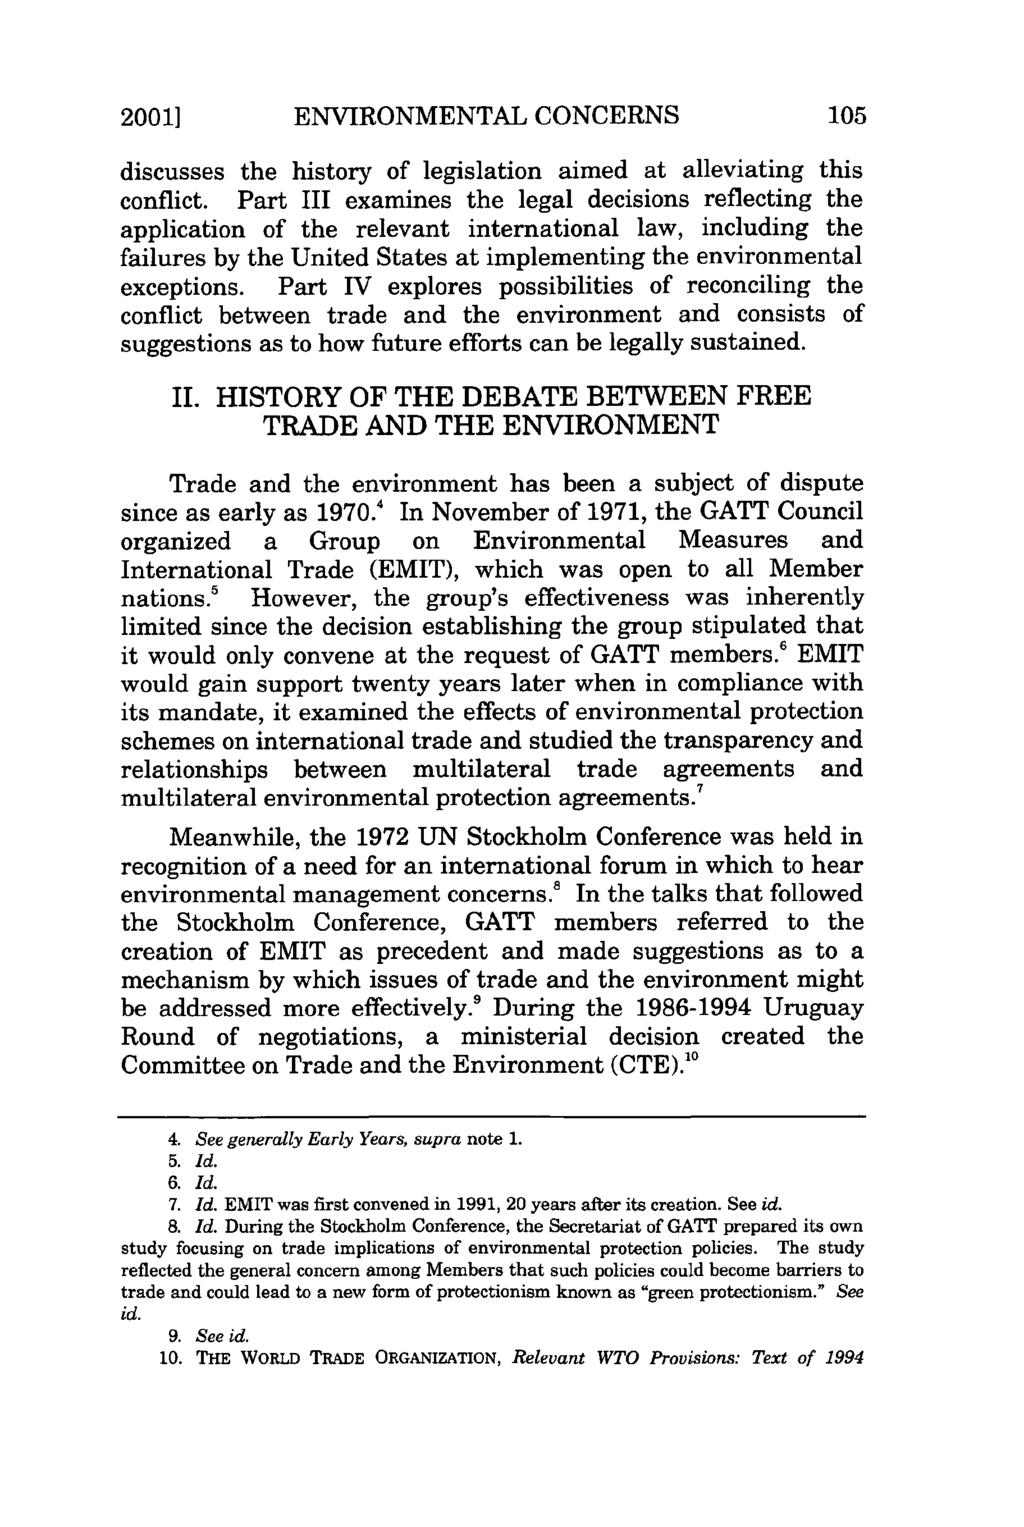 2001] ENVIRONMENTAL CONCERNS discusses the history of legislation aimed at alleviating this conflict.